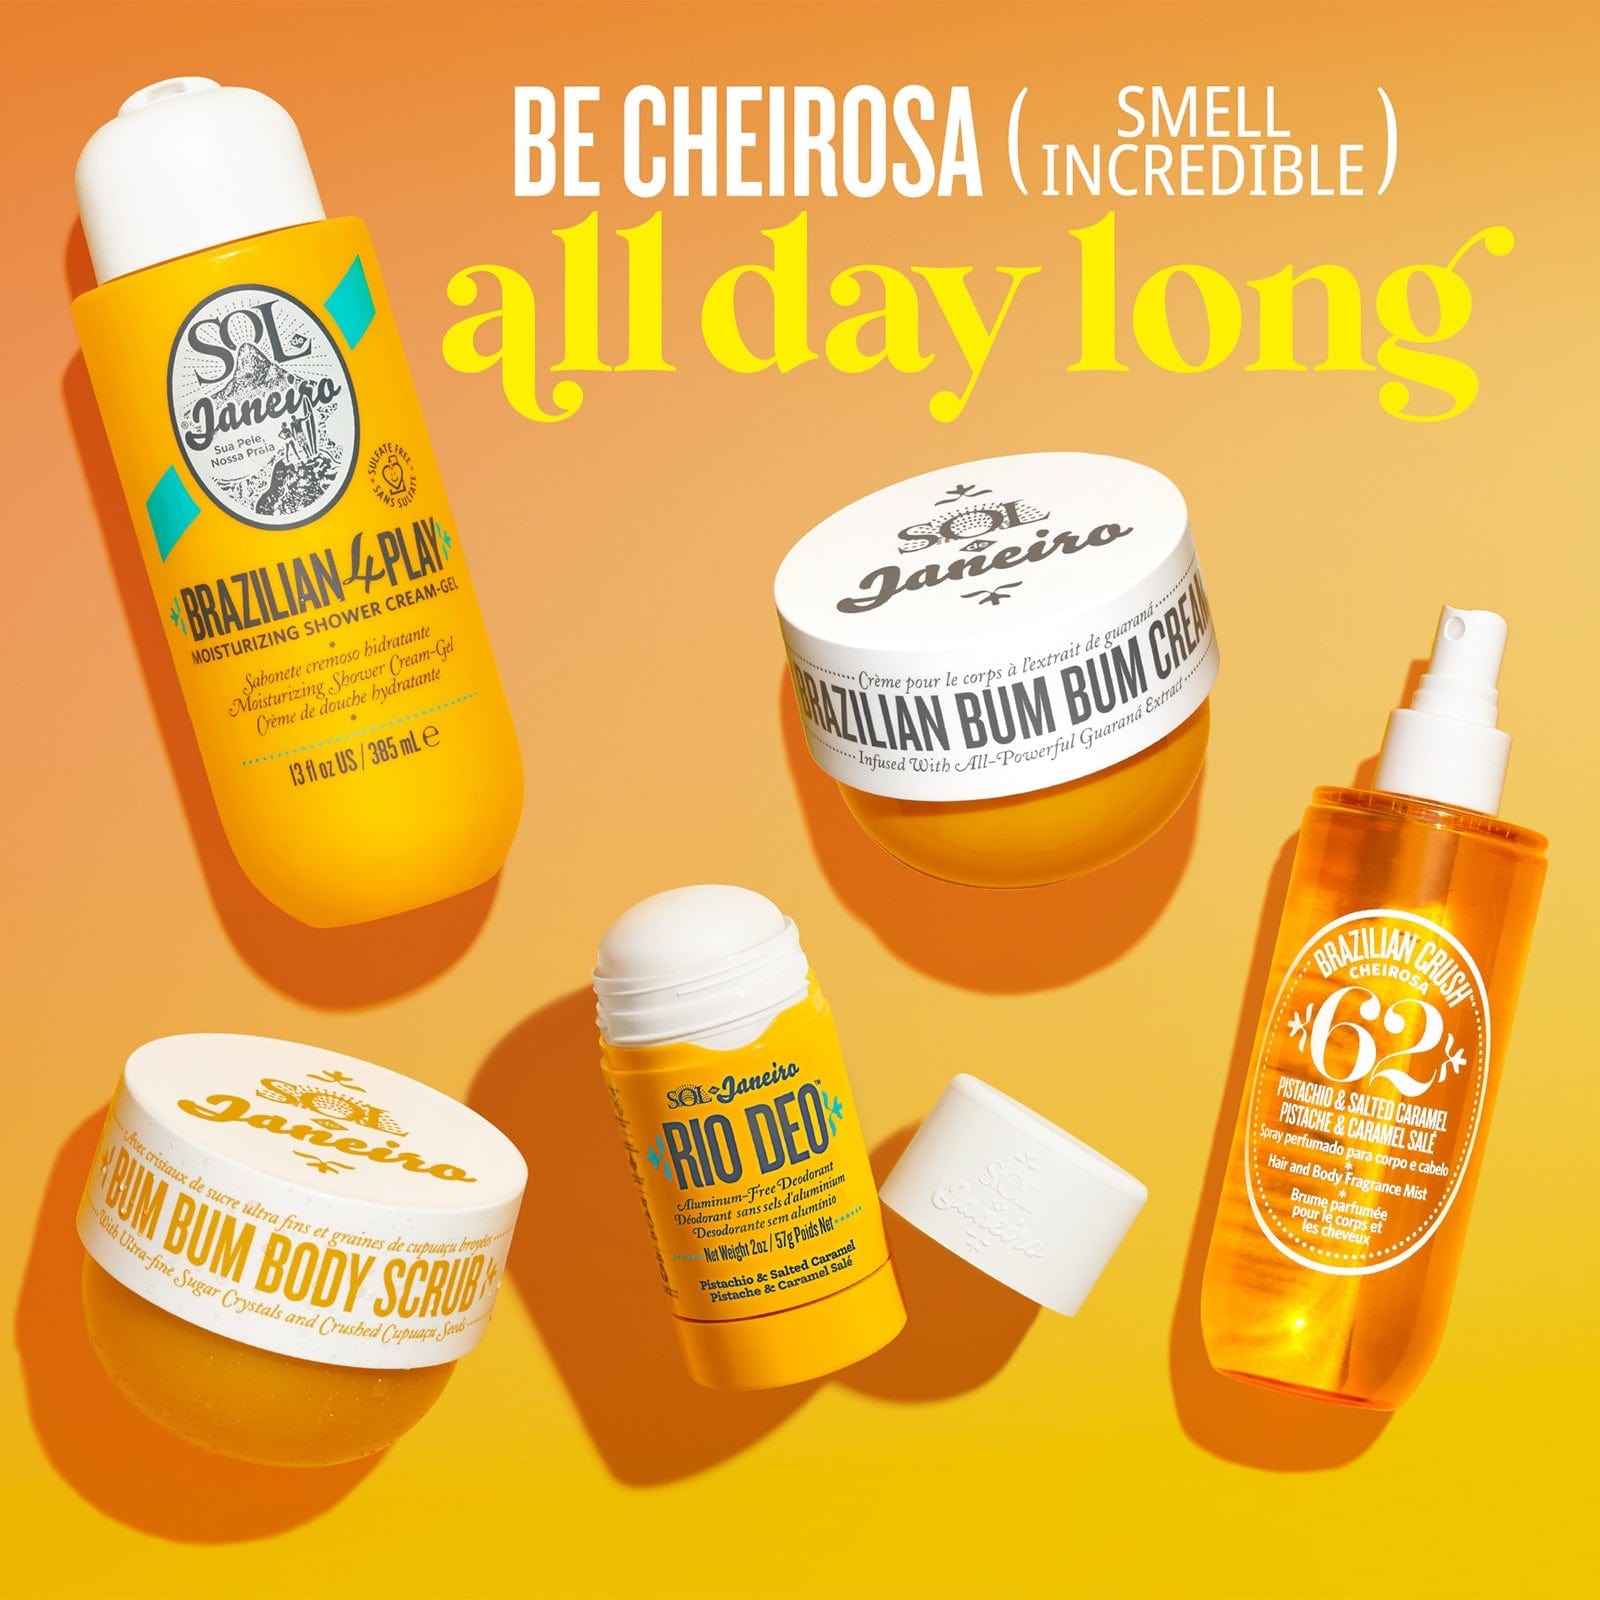 Be cheirosa (smell Incredible) all day Long